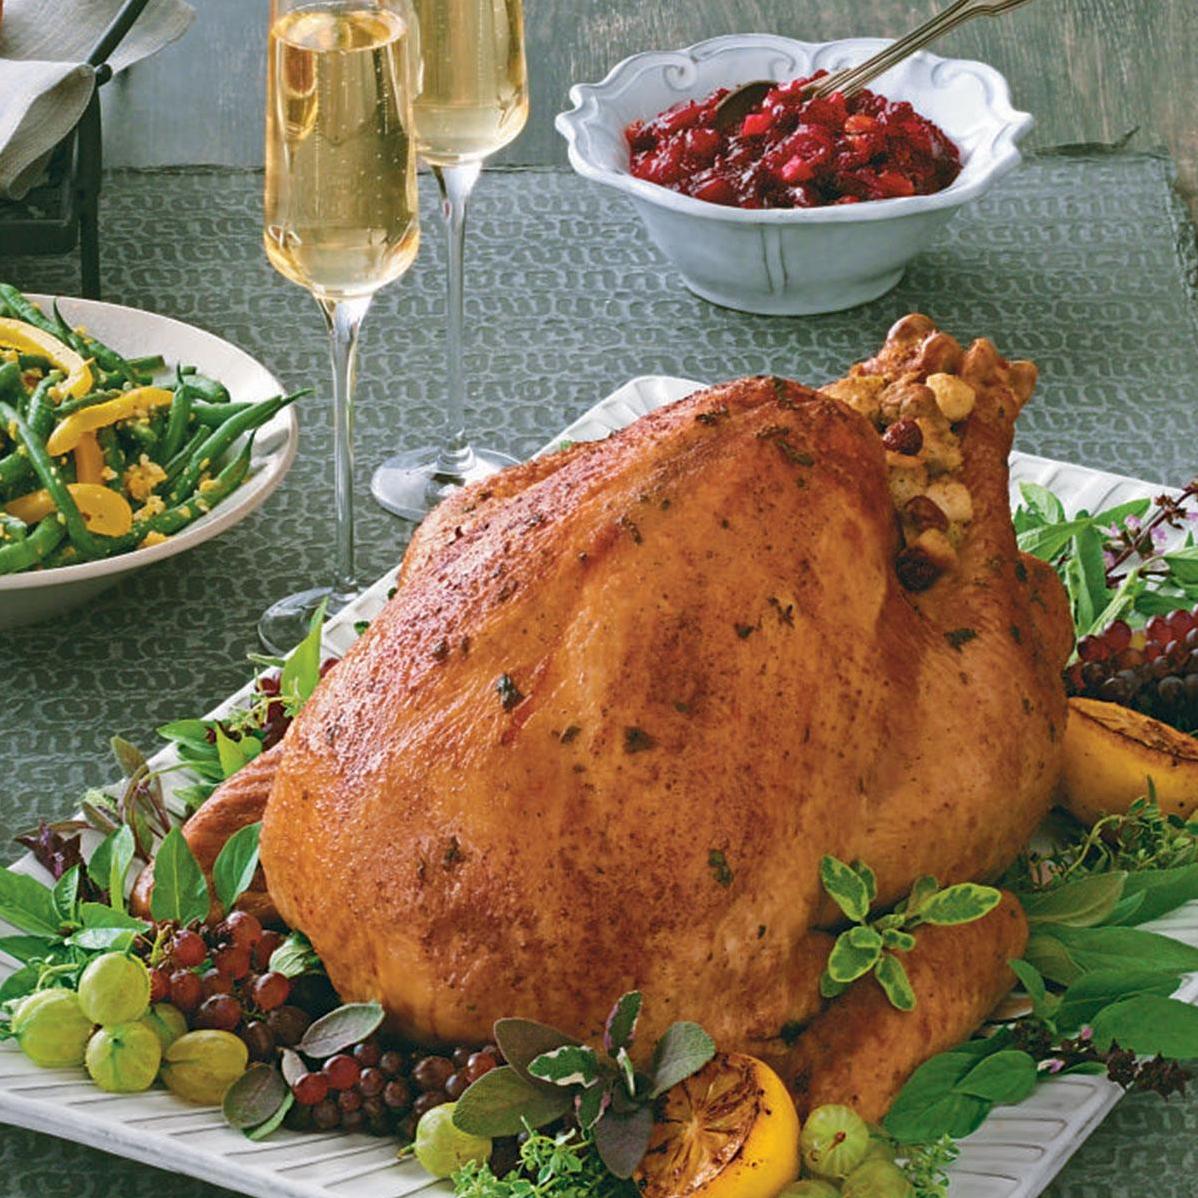  Pop open a bottle of bubbly and get ready to cook up the juiciest turkey you've ever had!